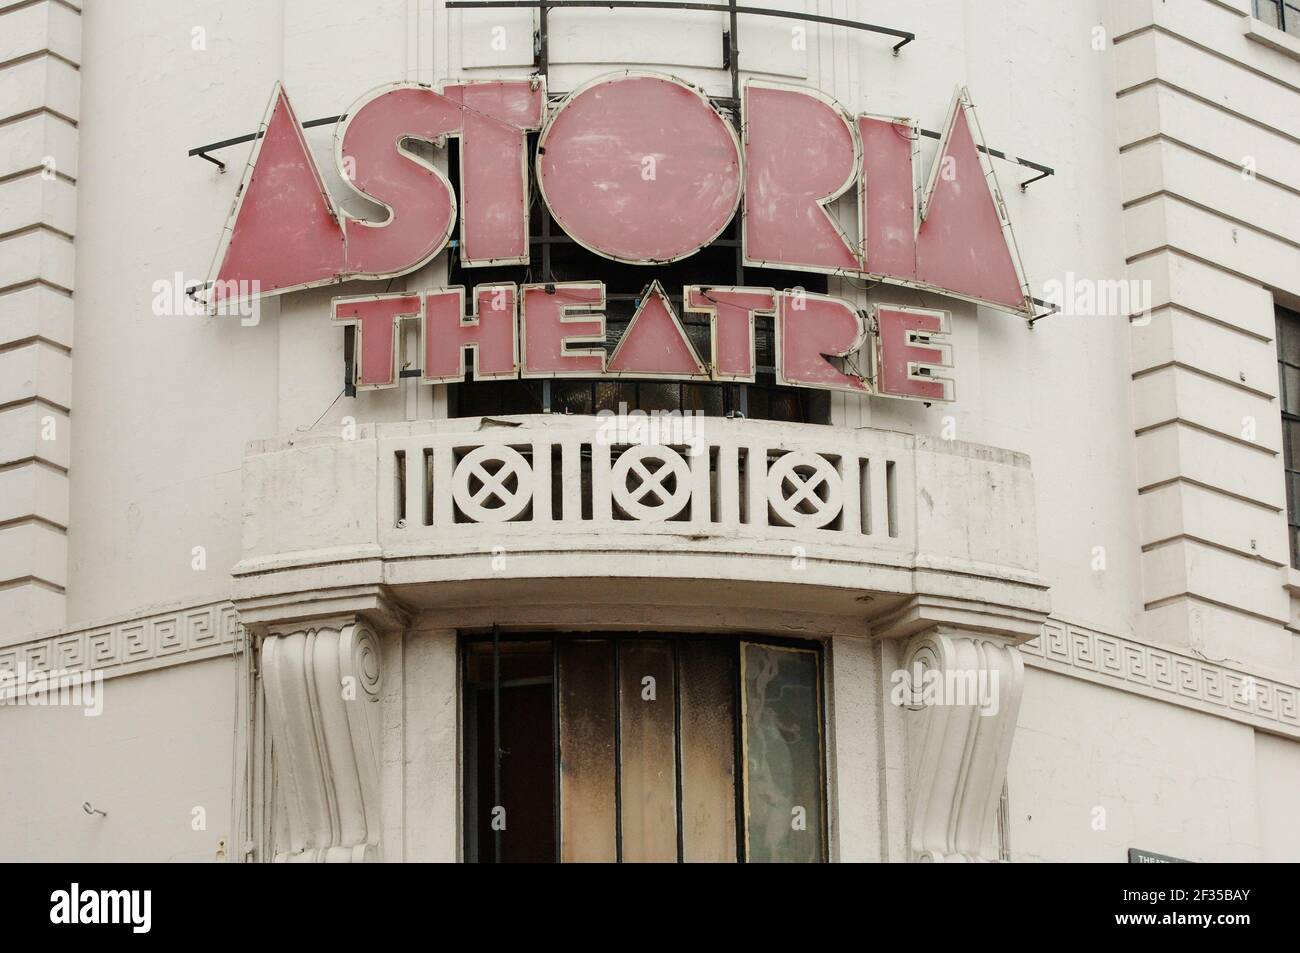 The Astoria Theatre, Charing Cross Road London, opened in 1927 as a cinema, it was designed by architect Edward A. Stone. It was was converted to a theatre in 1977 before becoming a nightclub and live music in venue 1985. In January 2009, the Astoria closed its doors for the last time and was demolished as part Crossrail redevelopment of Tottenham Court Road station. Astoria Theatre, Charing Cross Road , London, UK.  10 Jan 2006 Stock Photo